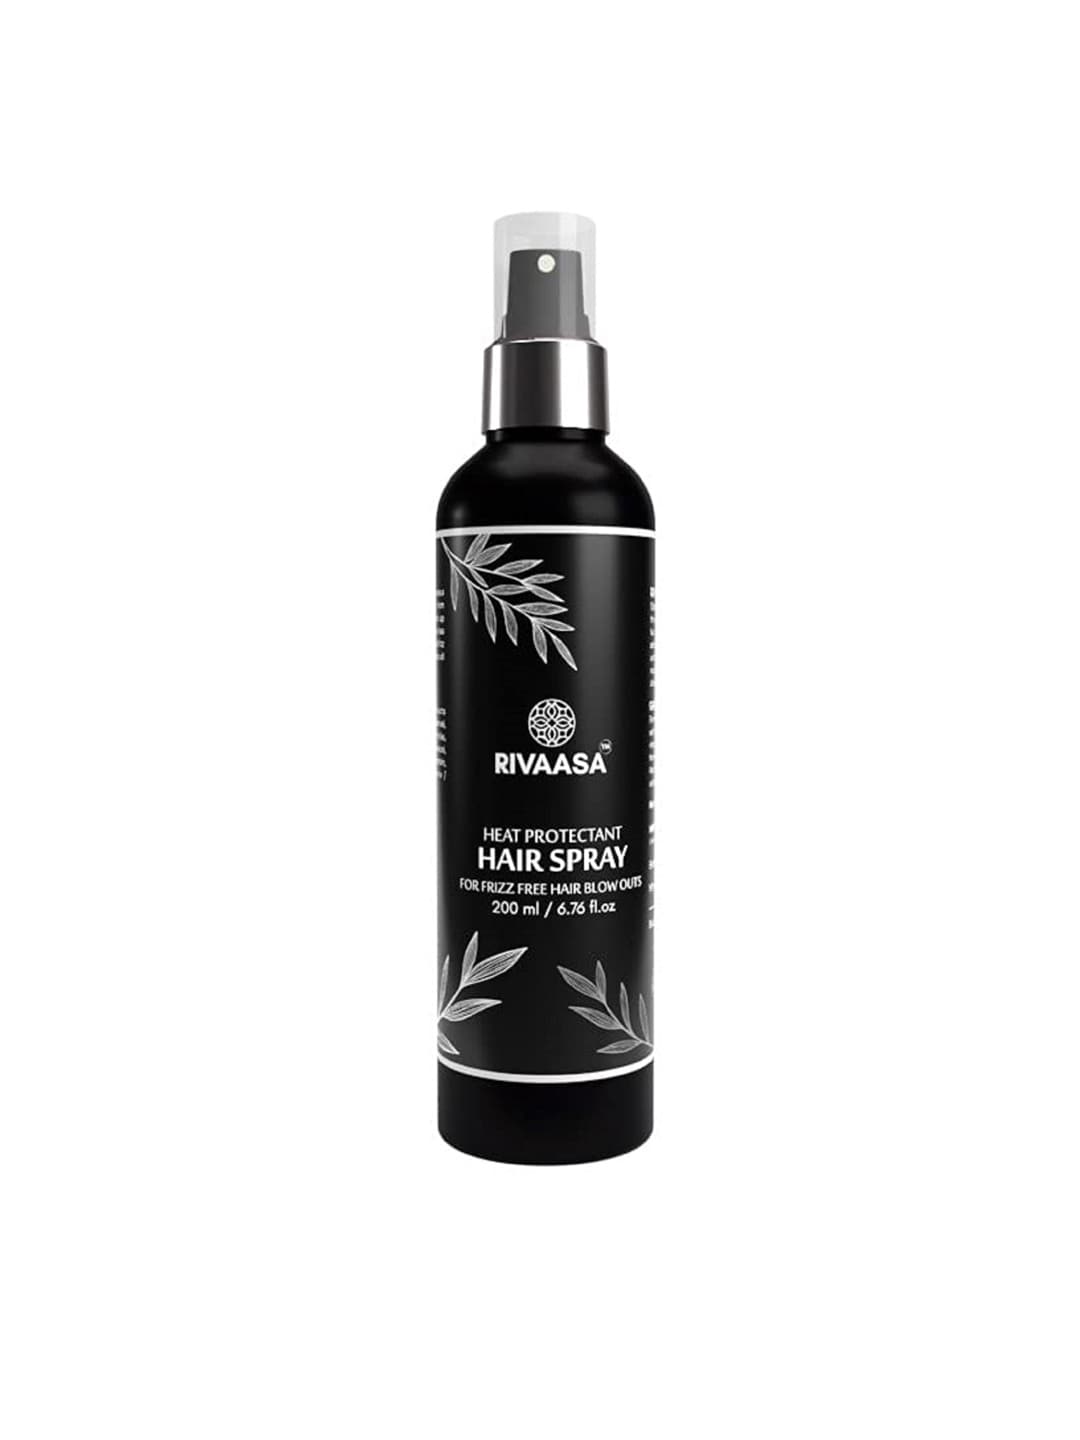 RIVAASA Heat Protectant Hair Spray with Roseberry-Hibiscus & Neem 200 ml Price in India